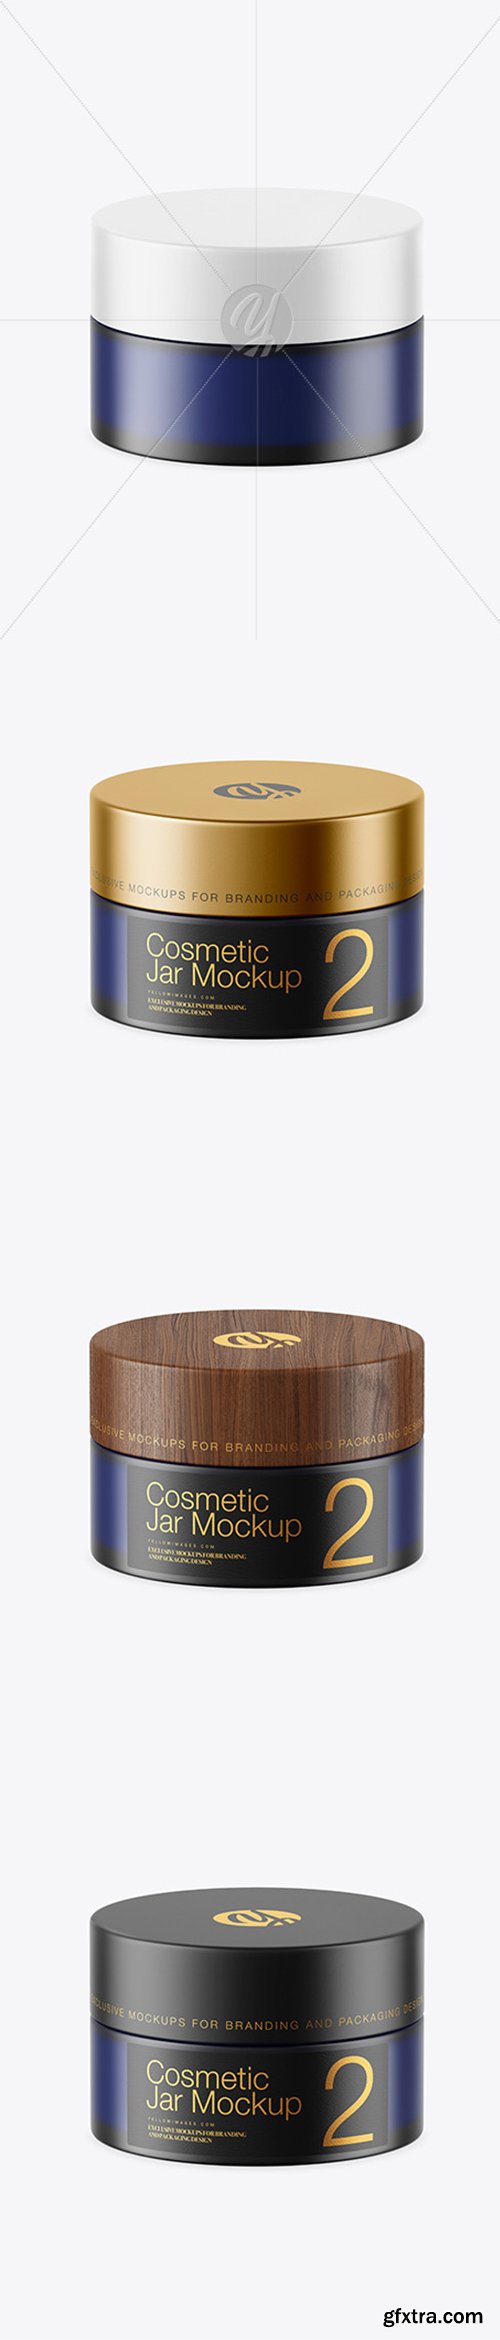 Dark Frosted Blue Glass Cosmetic Jar Mockup 45160